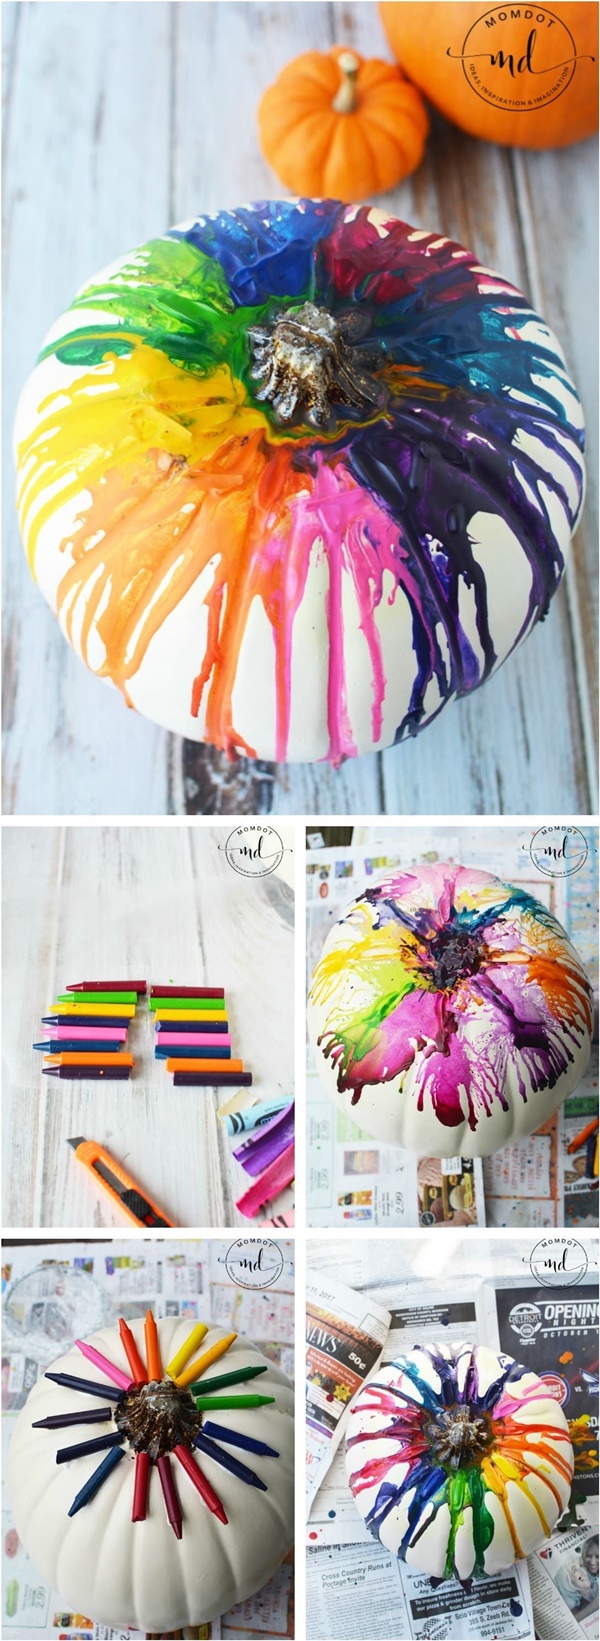 Amazing Melted Crayon Art Ideas For Beginners